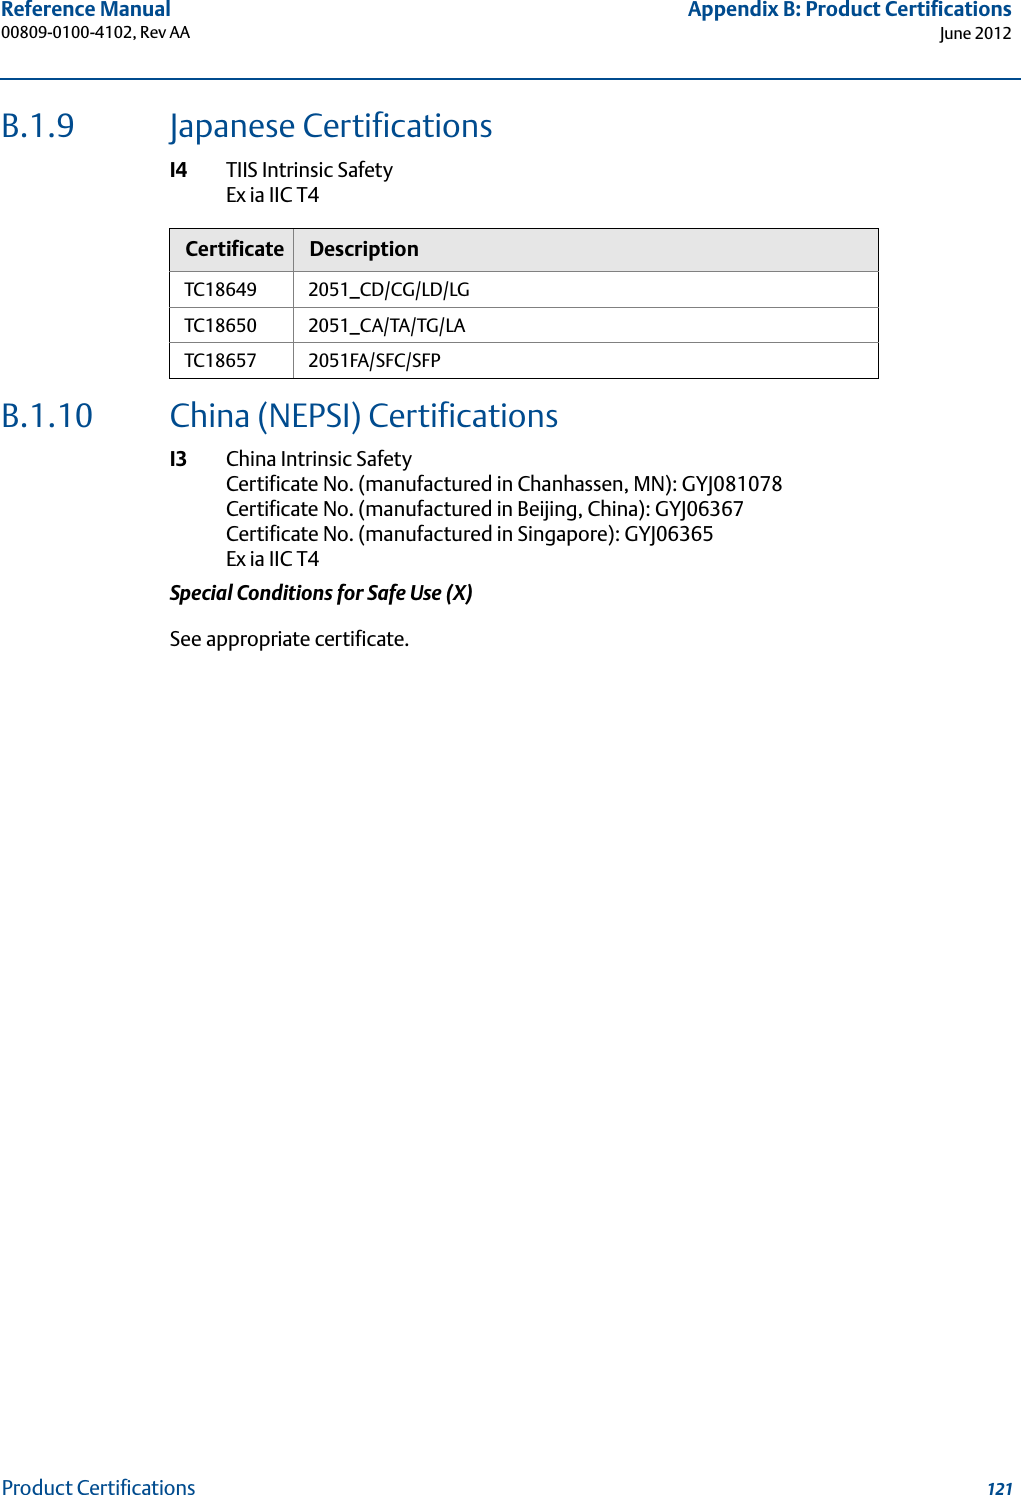 121Reference Manual 00809-0100-4102, Rev AAAppendix B: Product CertificationsJune 2012Product CertificationsB.1.9 Japanese Certifications I4 TIIS Intrinsic SafetyEx ia IIC T4B.1.10 China (NEPSI) CertificationsI3 China Intrinsic SafetyCertificate No. (manufactured in Chanhassen, MN): GYJ081078 Certificate No. (manufactured in Beijing, China): GYJ06367 Certificate No. (manufactured in Singapore): GYJ06365Ex ia IIC T4Special Conditions for Safe Use (X)See appropriate certificate.Certificate DescriptionTC18649 2051_CD/CG/LD/LGTC18650 2051_CA/TA/TG/LATC18657 2051FA/SFC/SFP